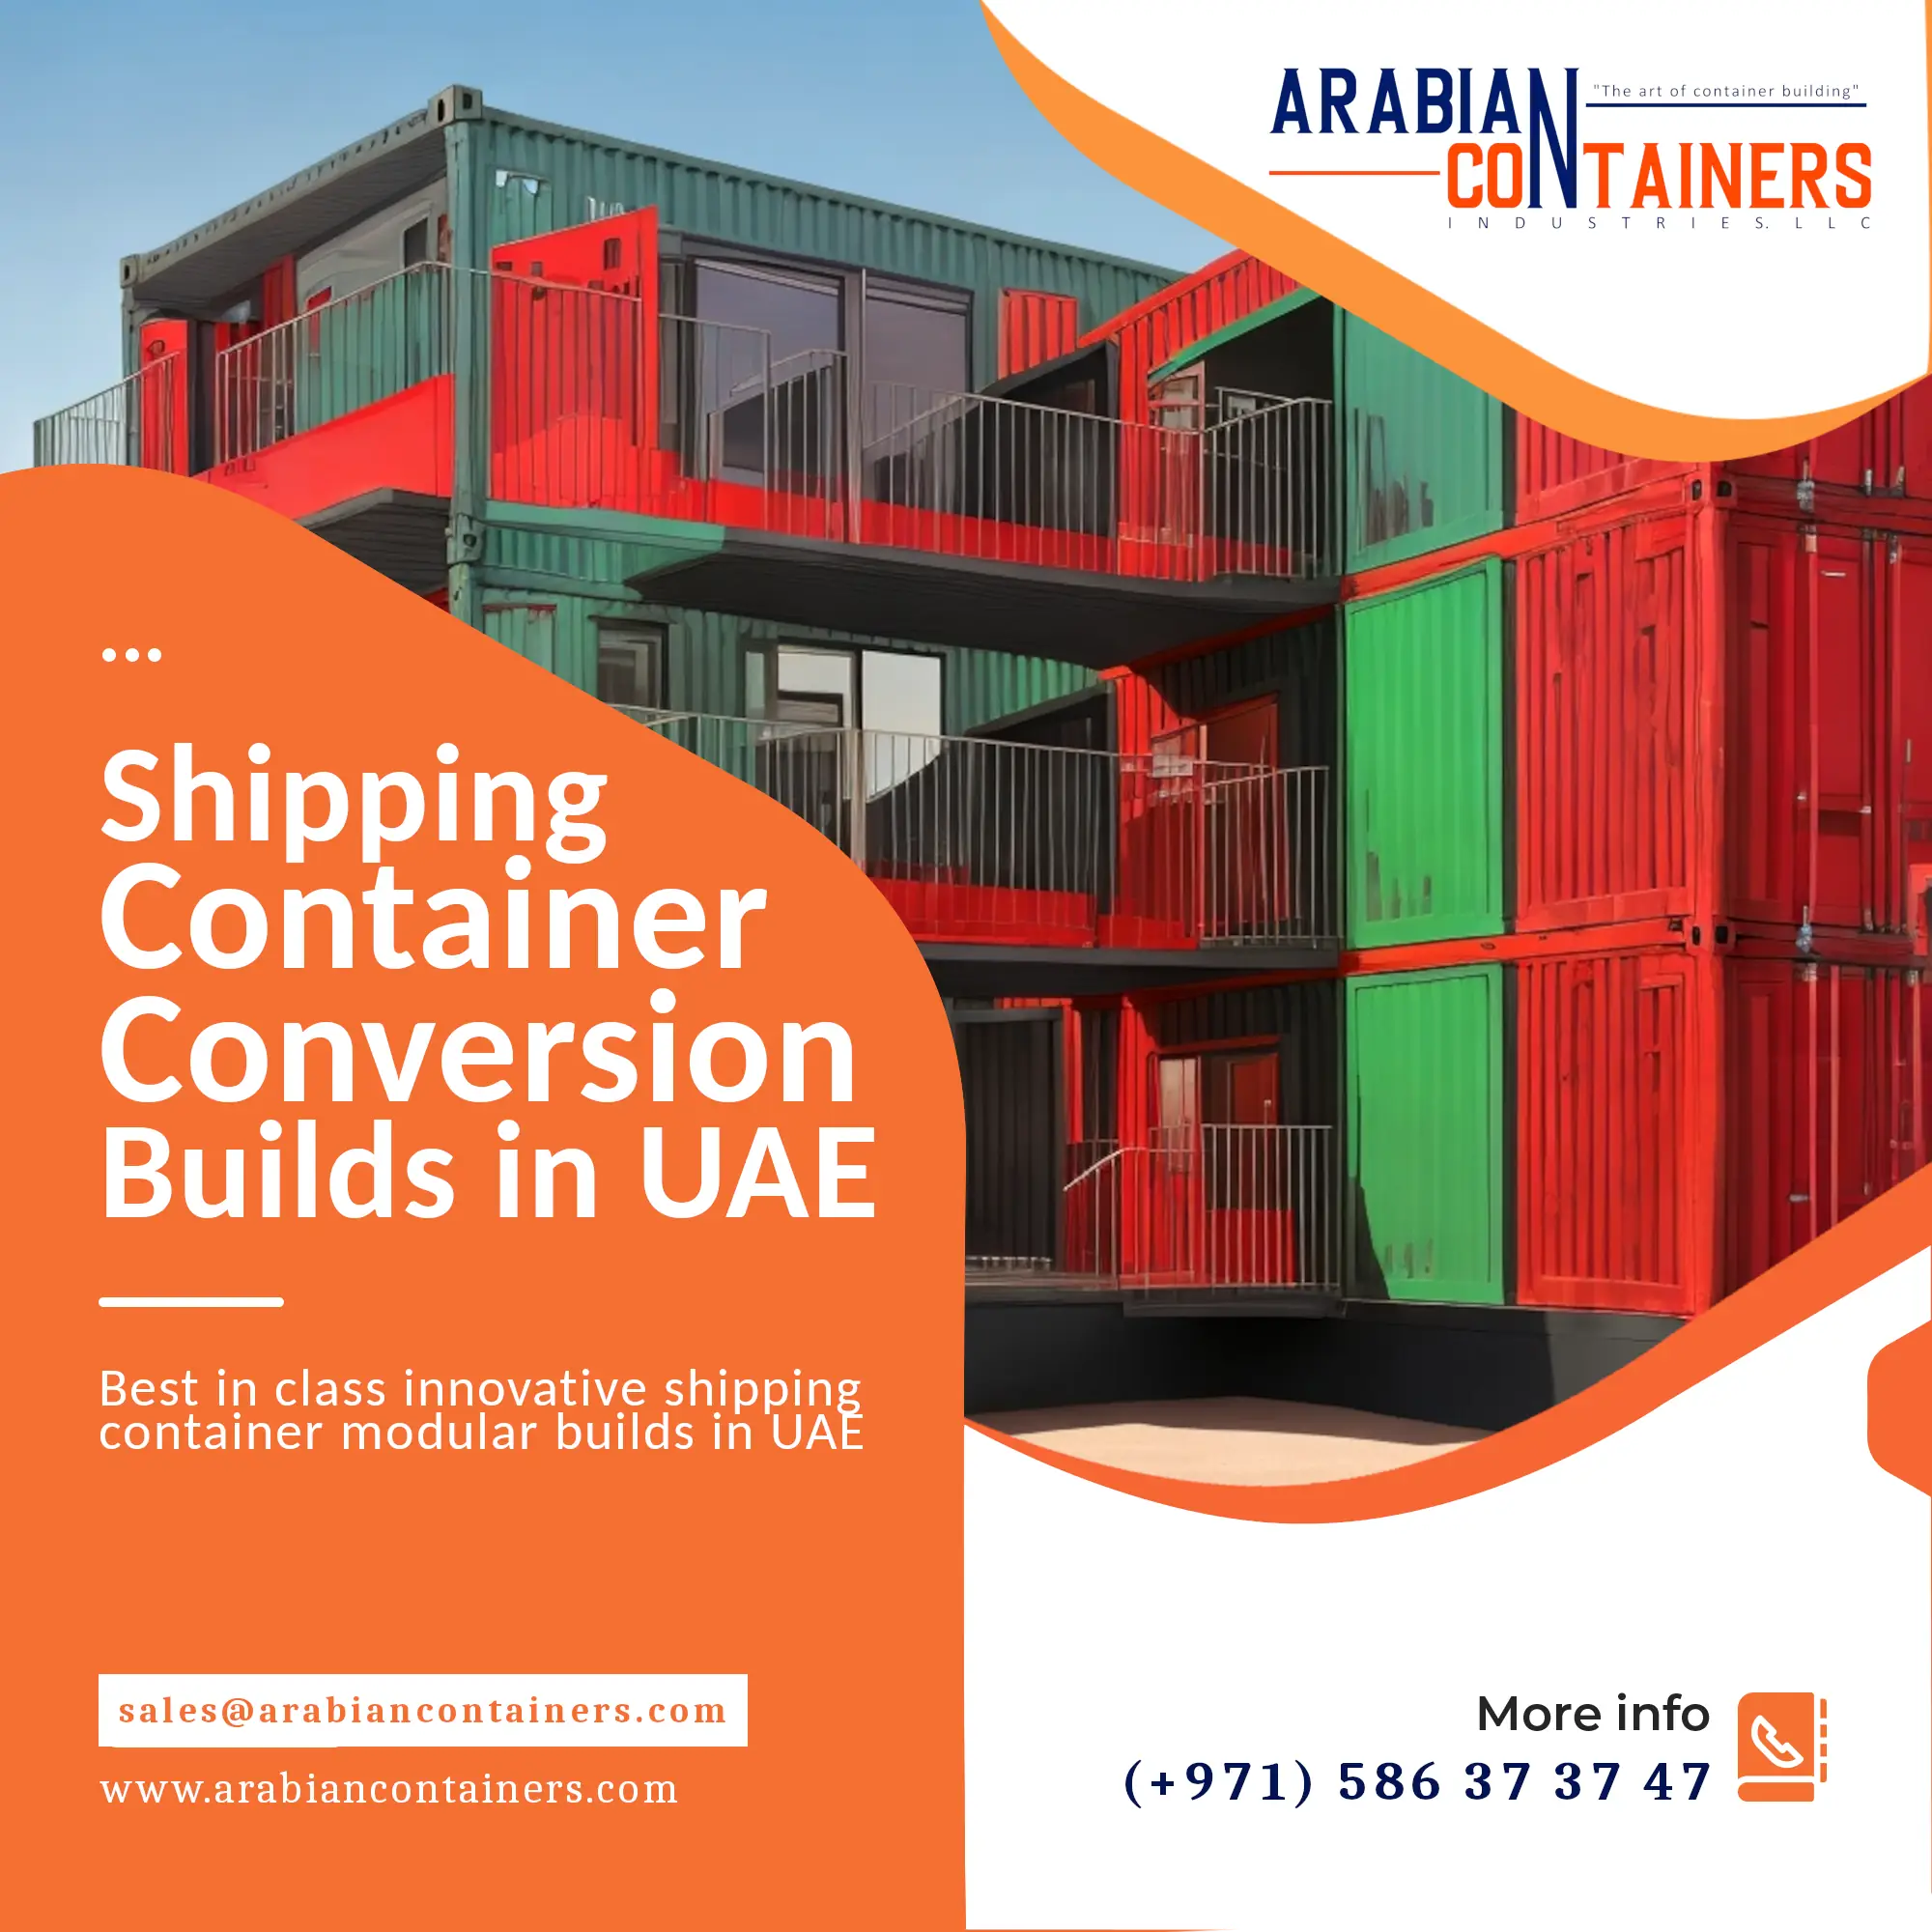 Shipping Container Conversion Projects in the UAE